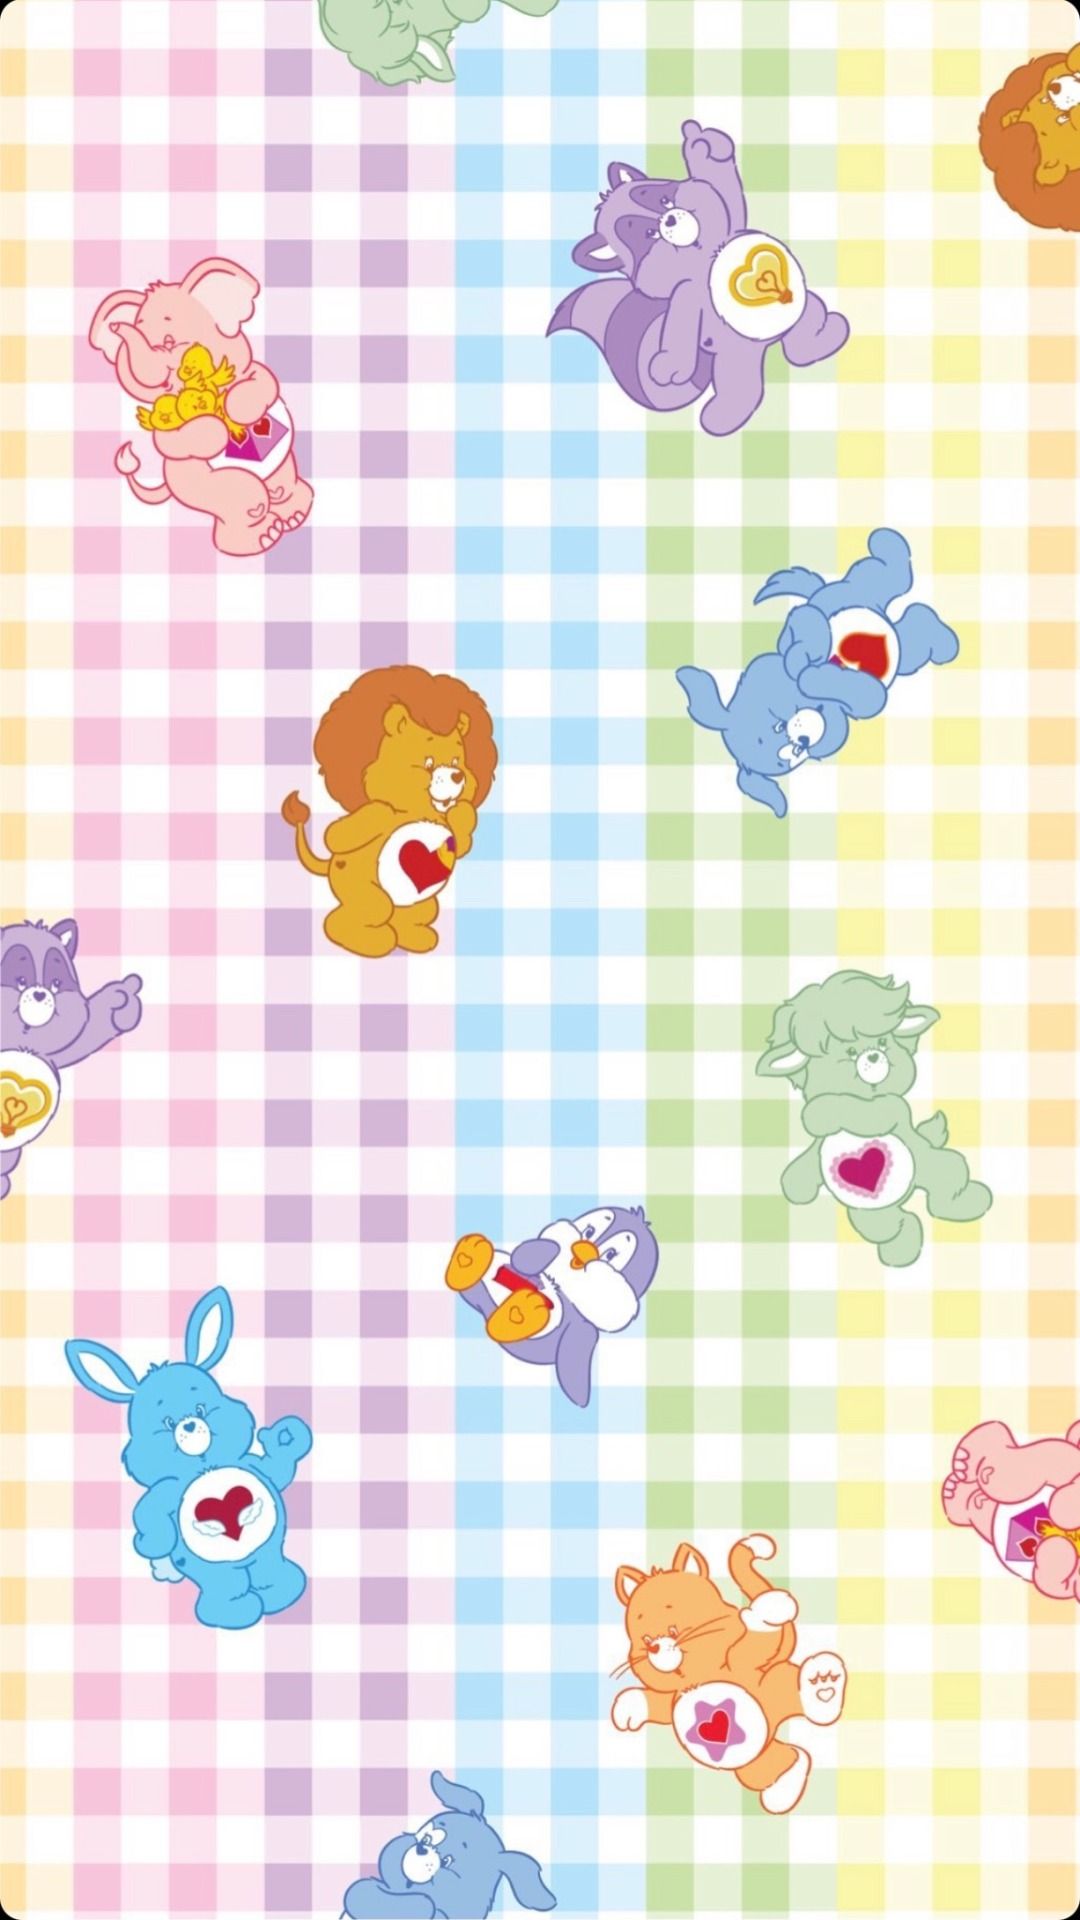 A pattern of bears and other animals on checkered fabric - Care Bears